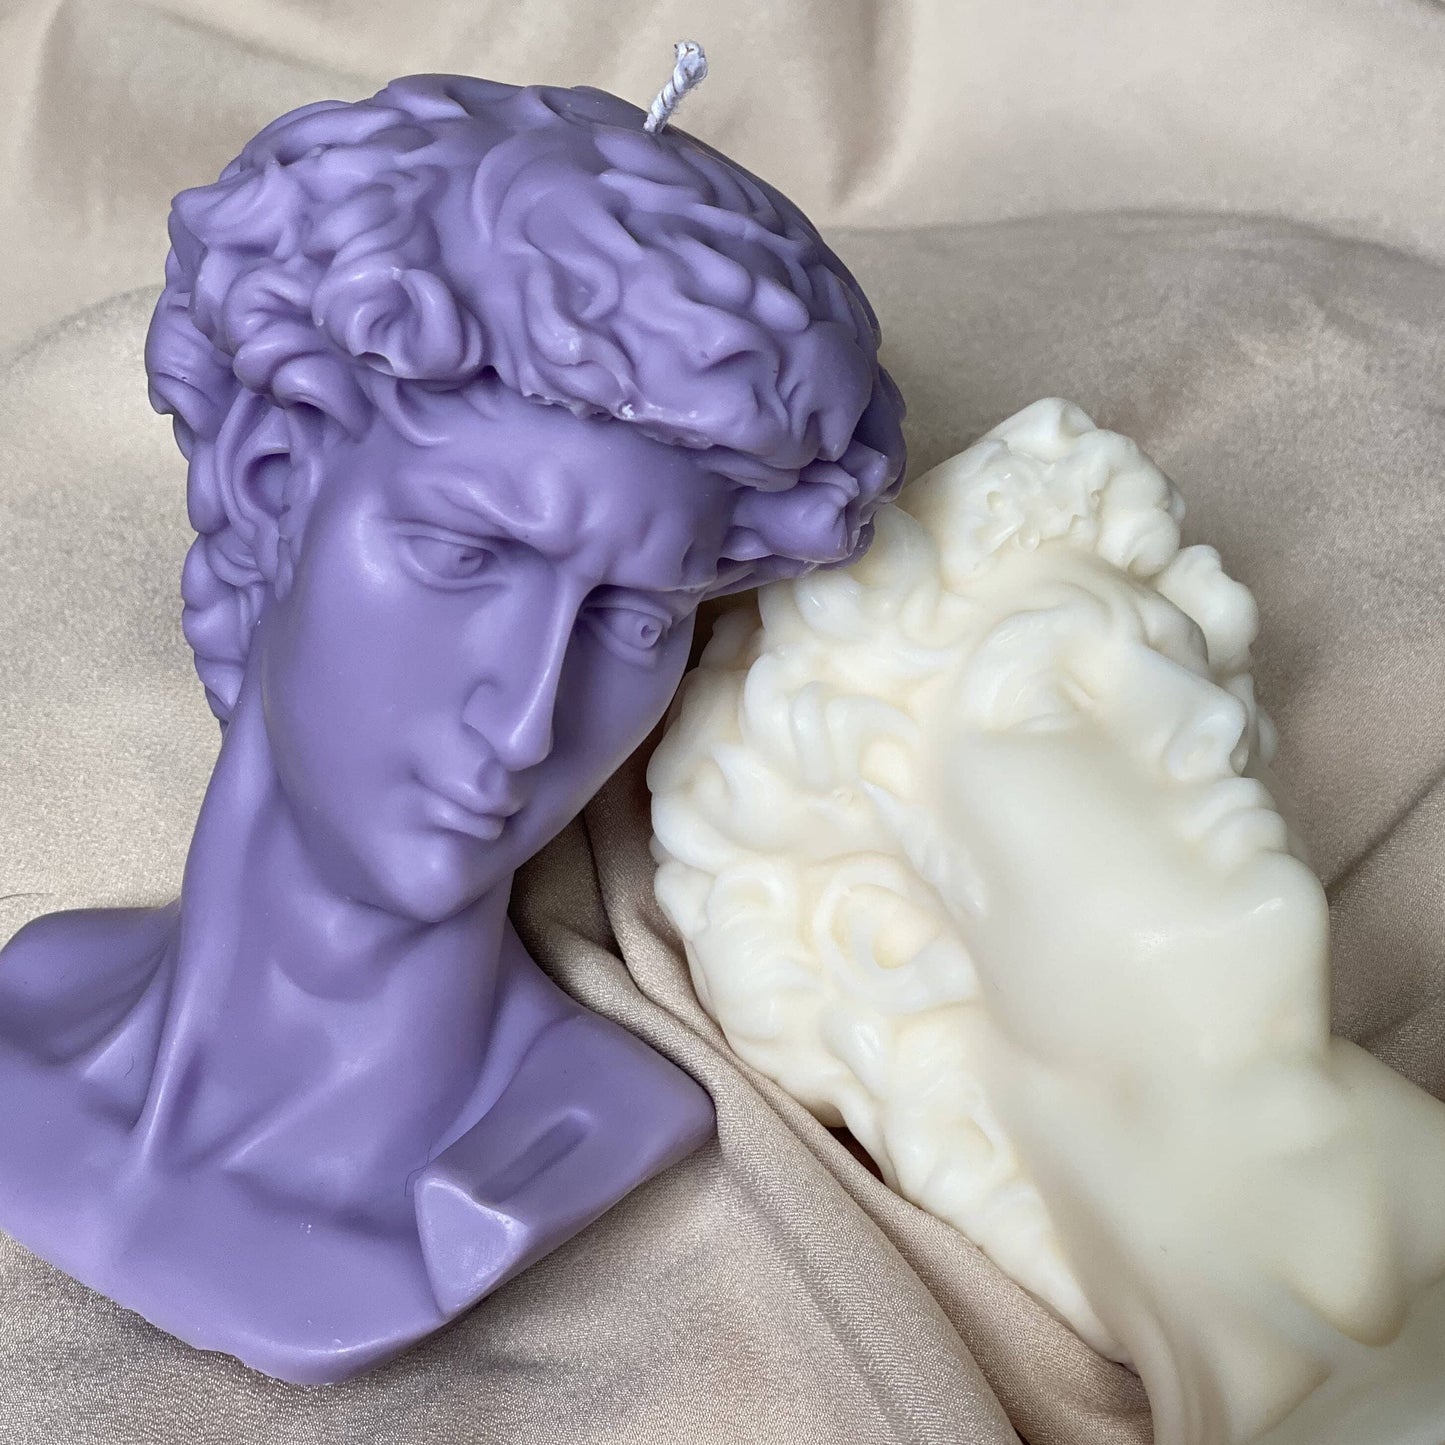 David's Bust Candle